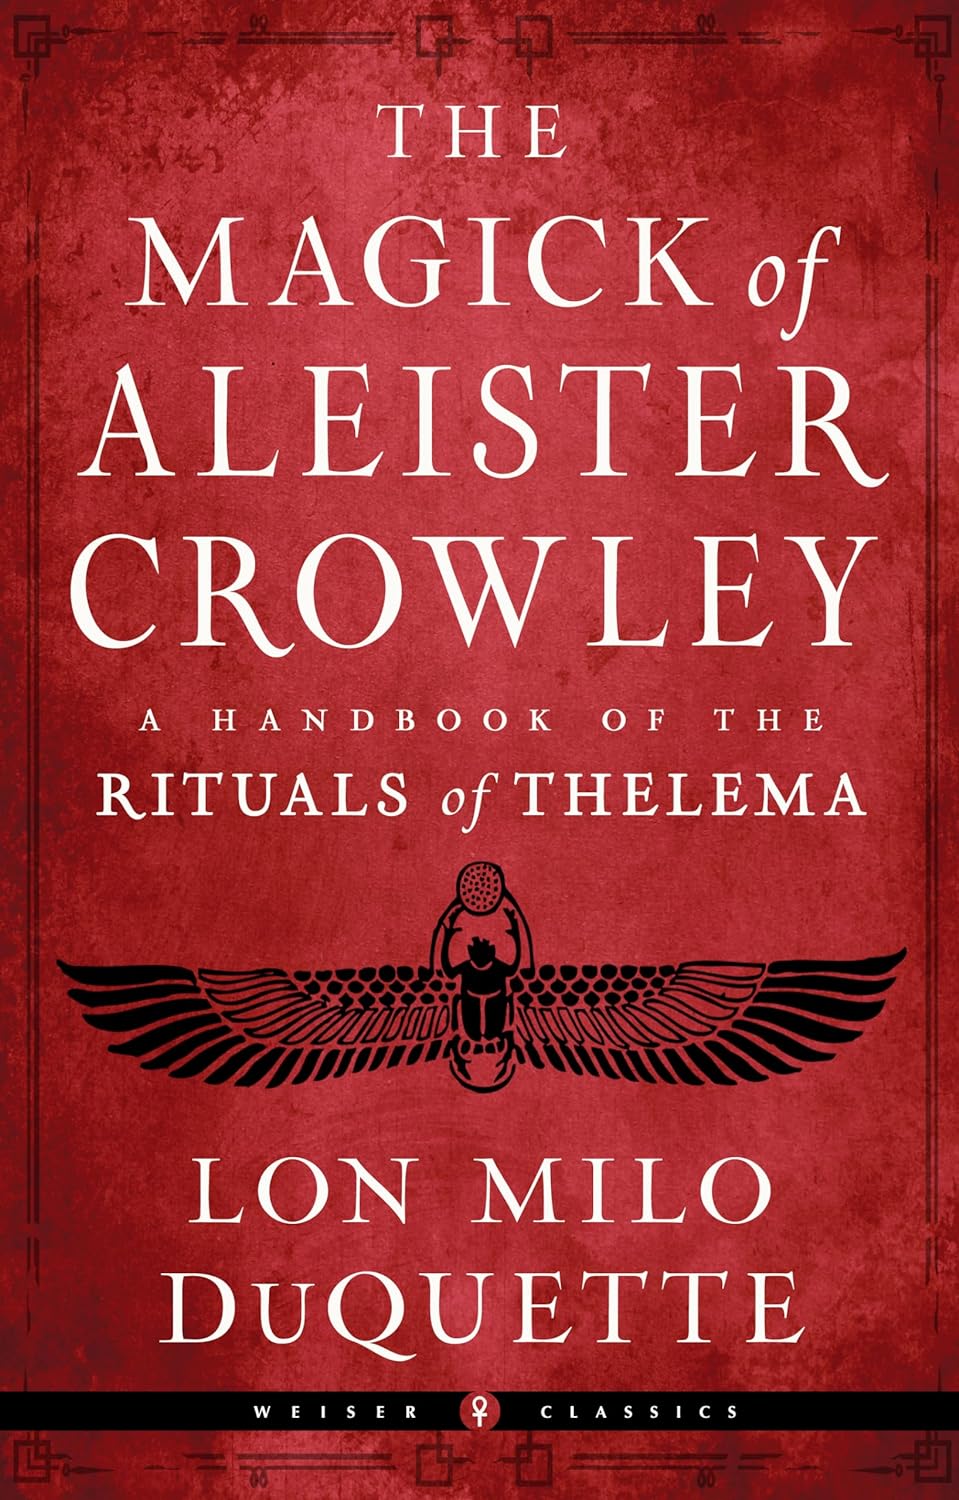 The Magick of Aleister Crowley: A Handbook of the Rituals of Thelema (Weiser Classics Series) by Lon Milo DuQuette